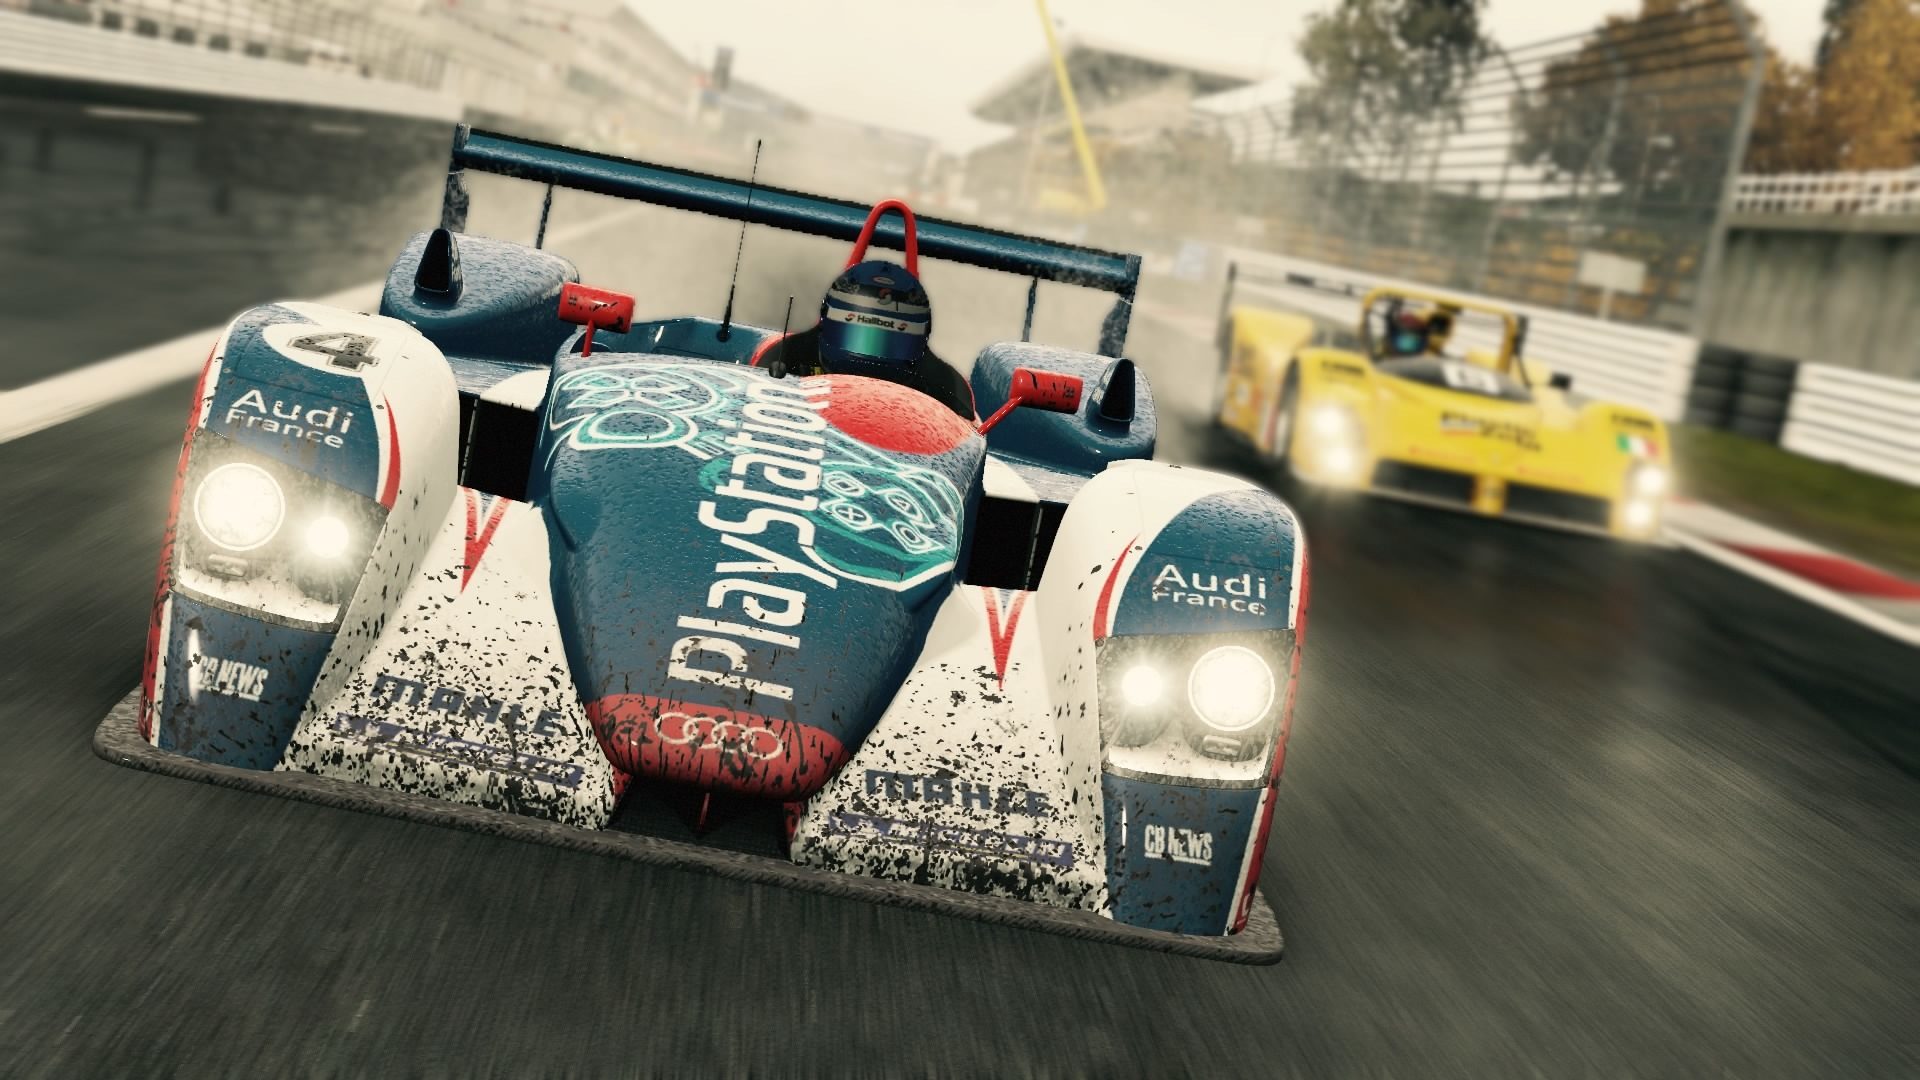 Project cars ps4. Project cars 2. Cars 2 ps4. PLAYSTATION 4 Project cars.